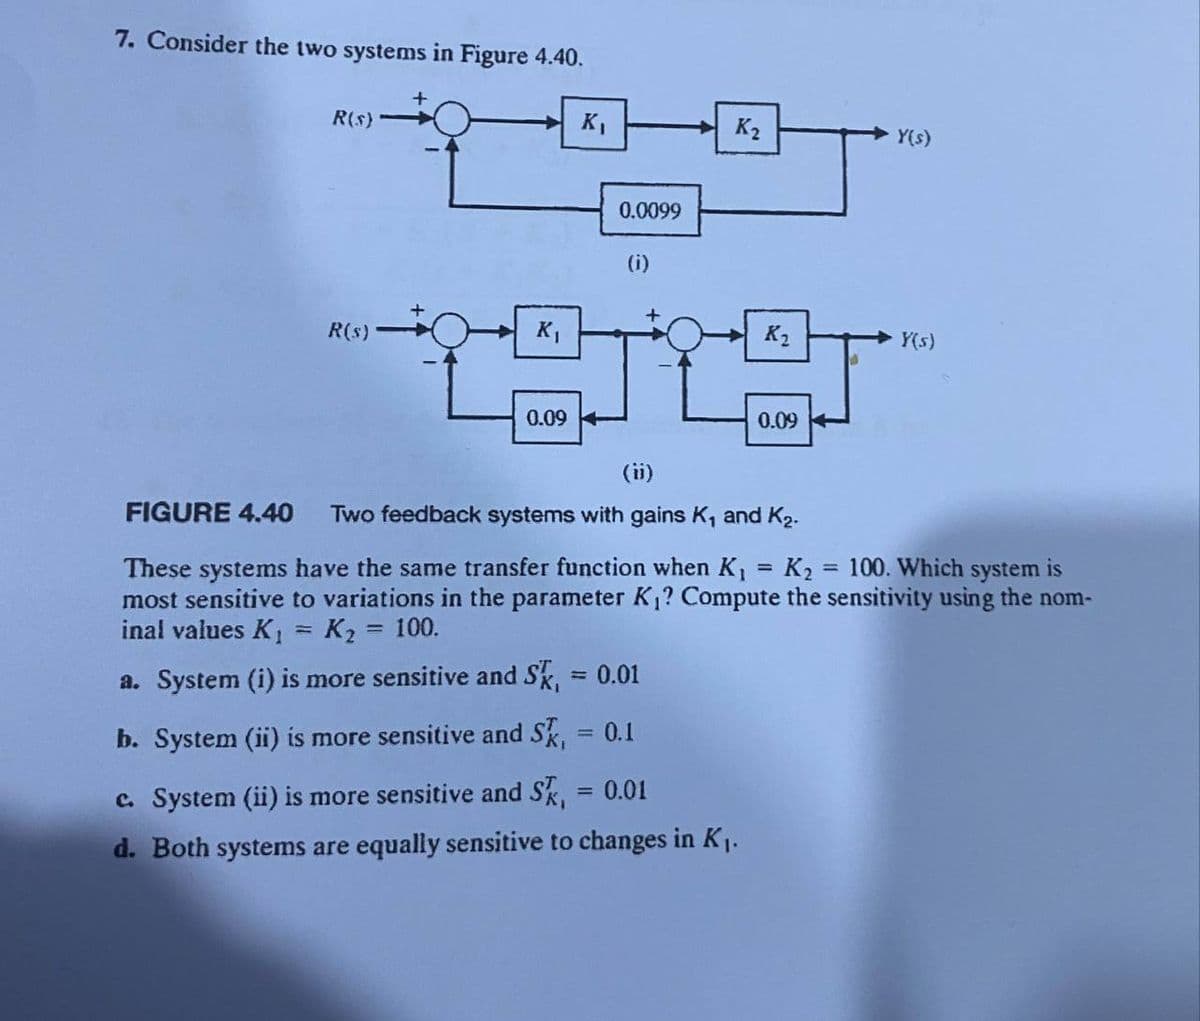 7. Consider the two systems in Figure 4.40.
R(s)
K,
K2
Y(s)
0.0099
(i)
R(s)
K2
Y(s)
0.09
0.09
(ii)
FIGURE 4.40
Two feedback systems with gains K, and K2.
These systems have the same transfer function when K
most sensitive to variations in the parameter K? Compute the sensitivity using the nom-
inal values K1
K2 = 100. Which system is
K2 = 100.
a. System (i) is more sensitive and S, = 0.01
b. System (ii) is more sensitive and Sk, = 0.1
%3D
%3D
c. System (ii) is more sensitive and Sk, = 0.01
d. Both systems are equally sensitive to changes in K1.
